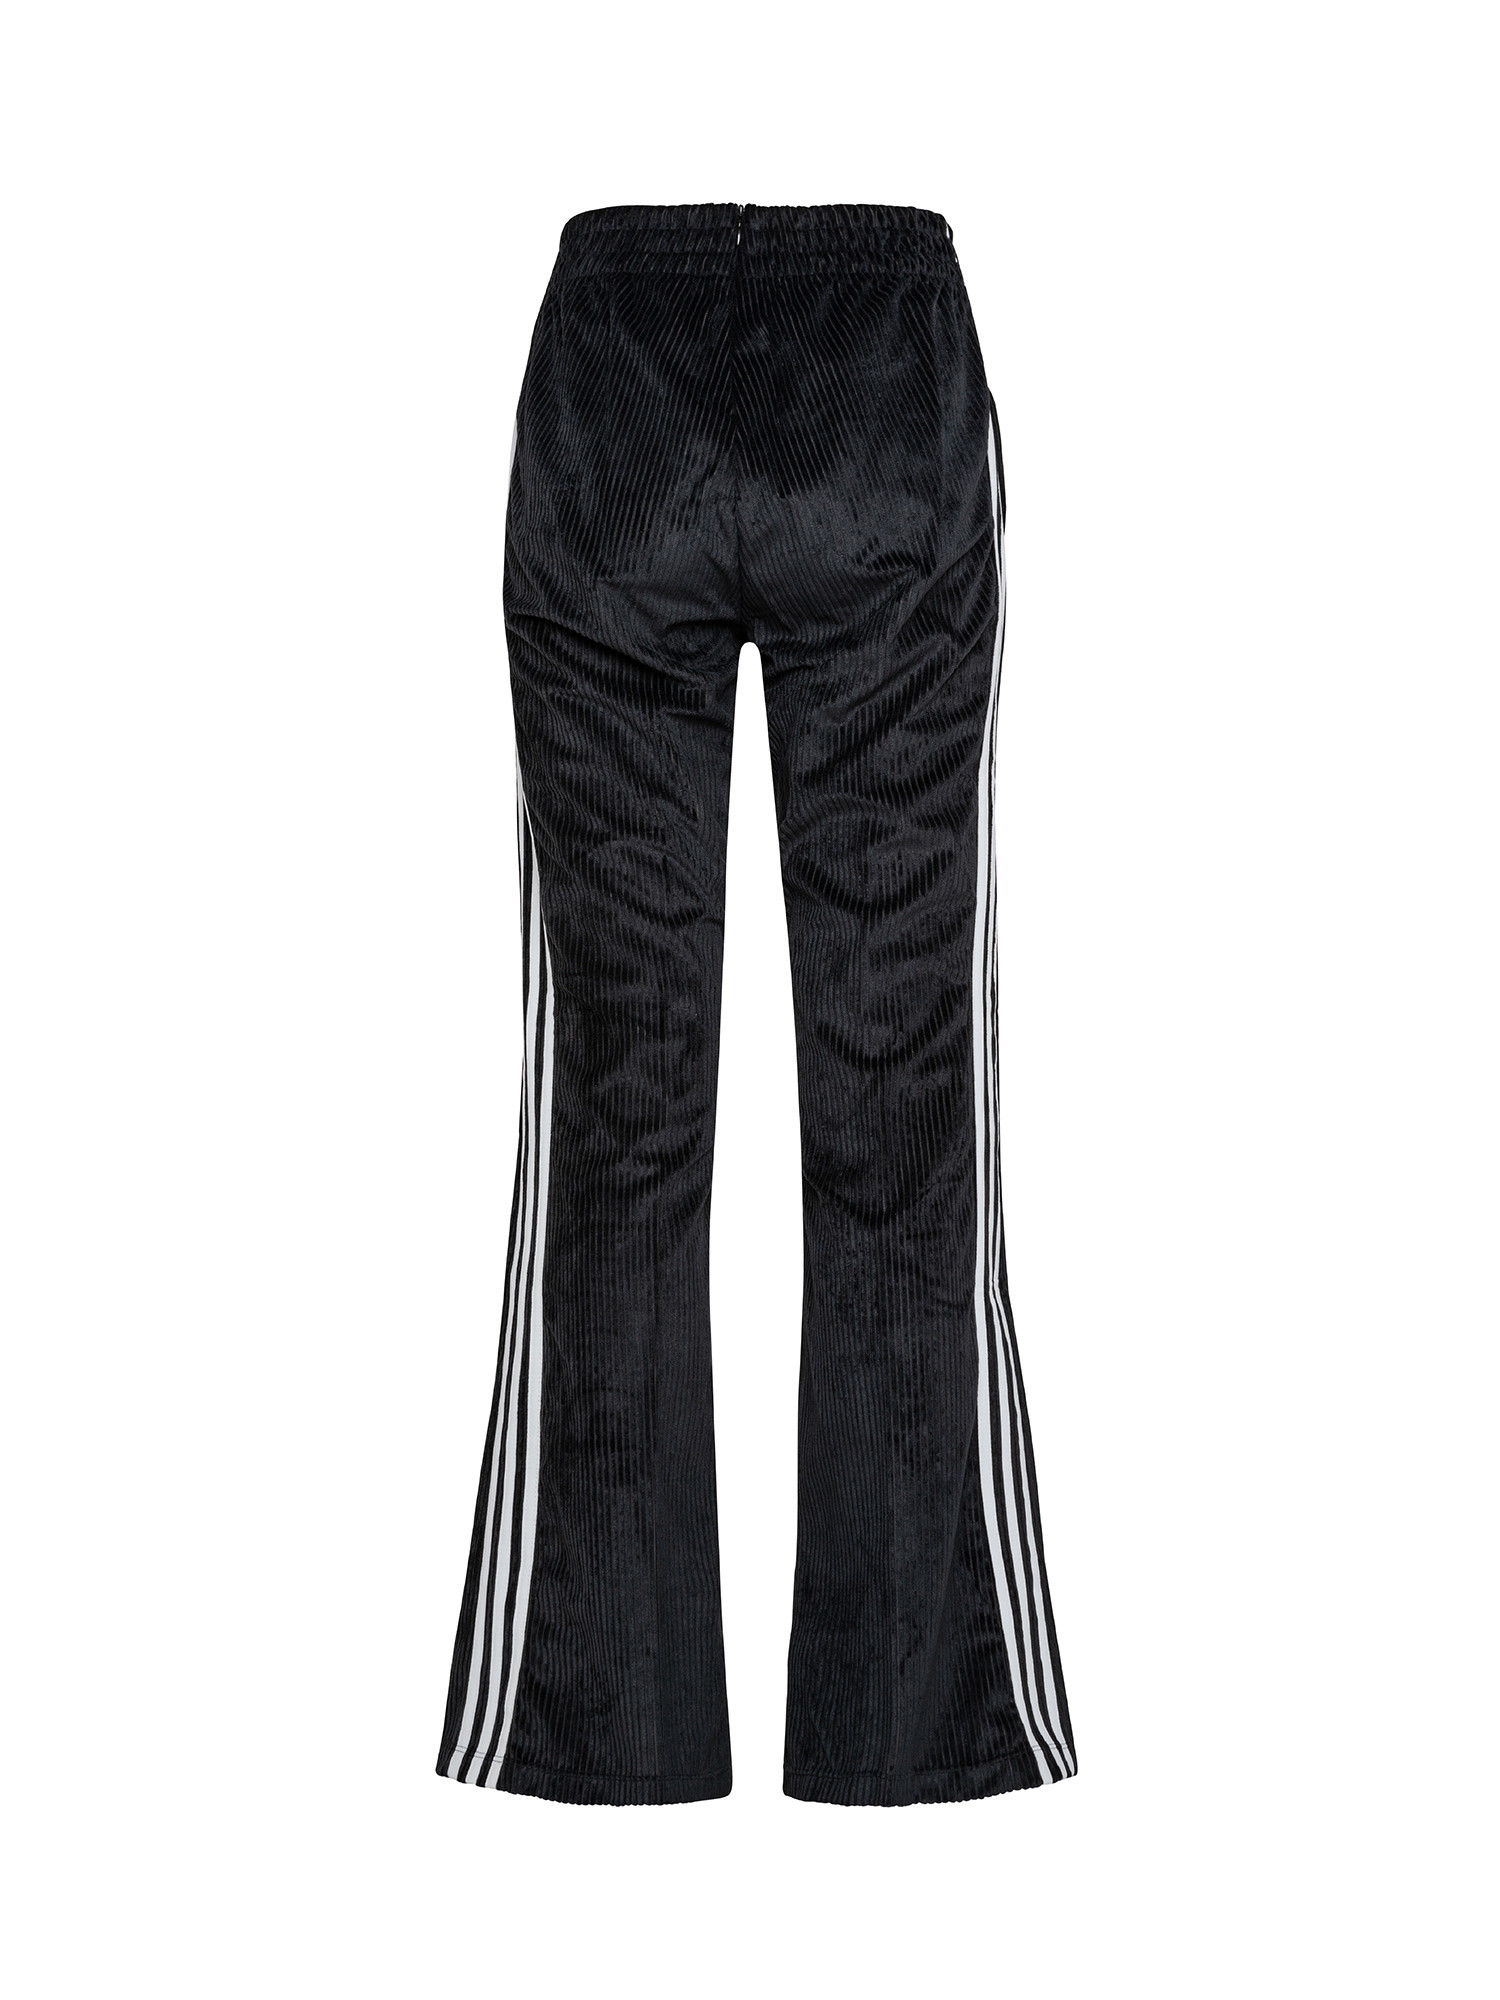 Relaxed Pant, Black, large image number 1